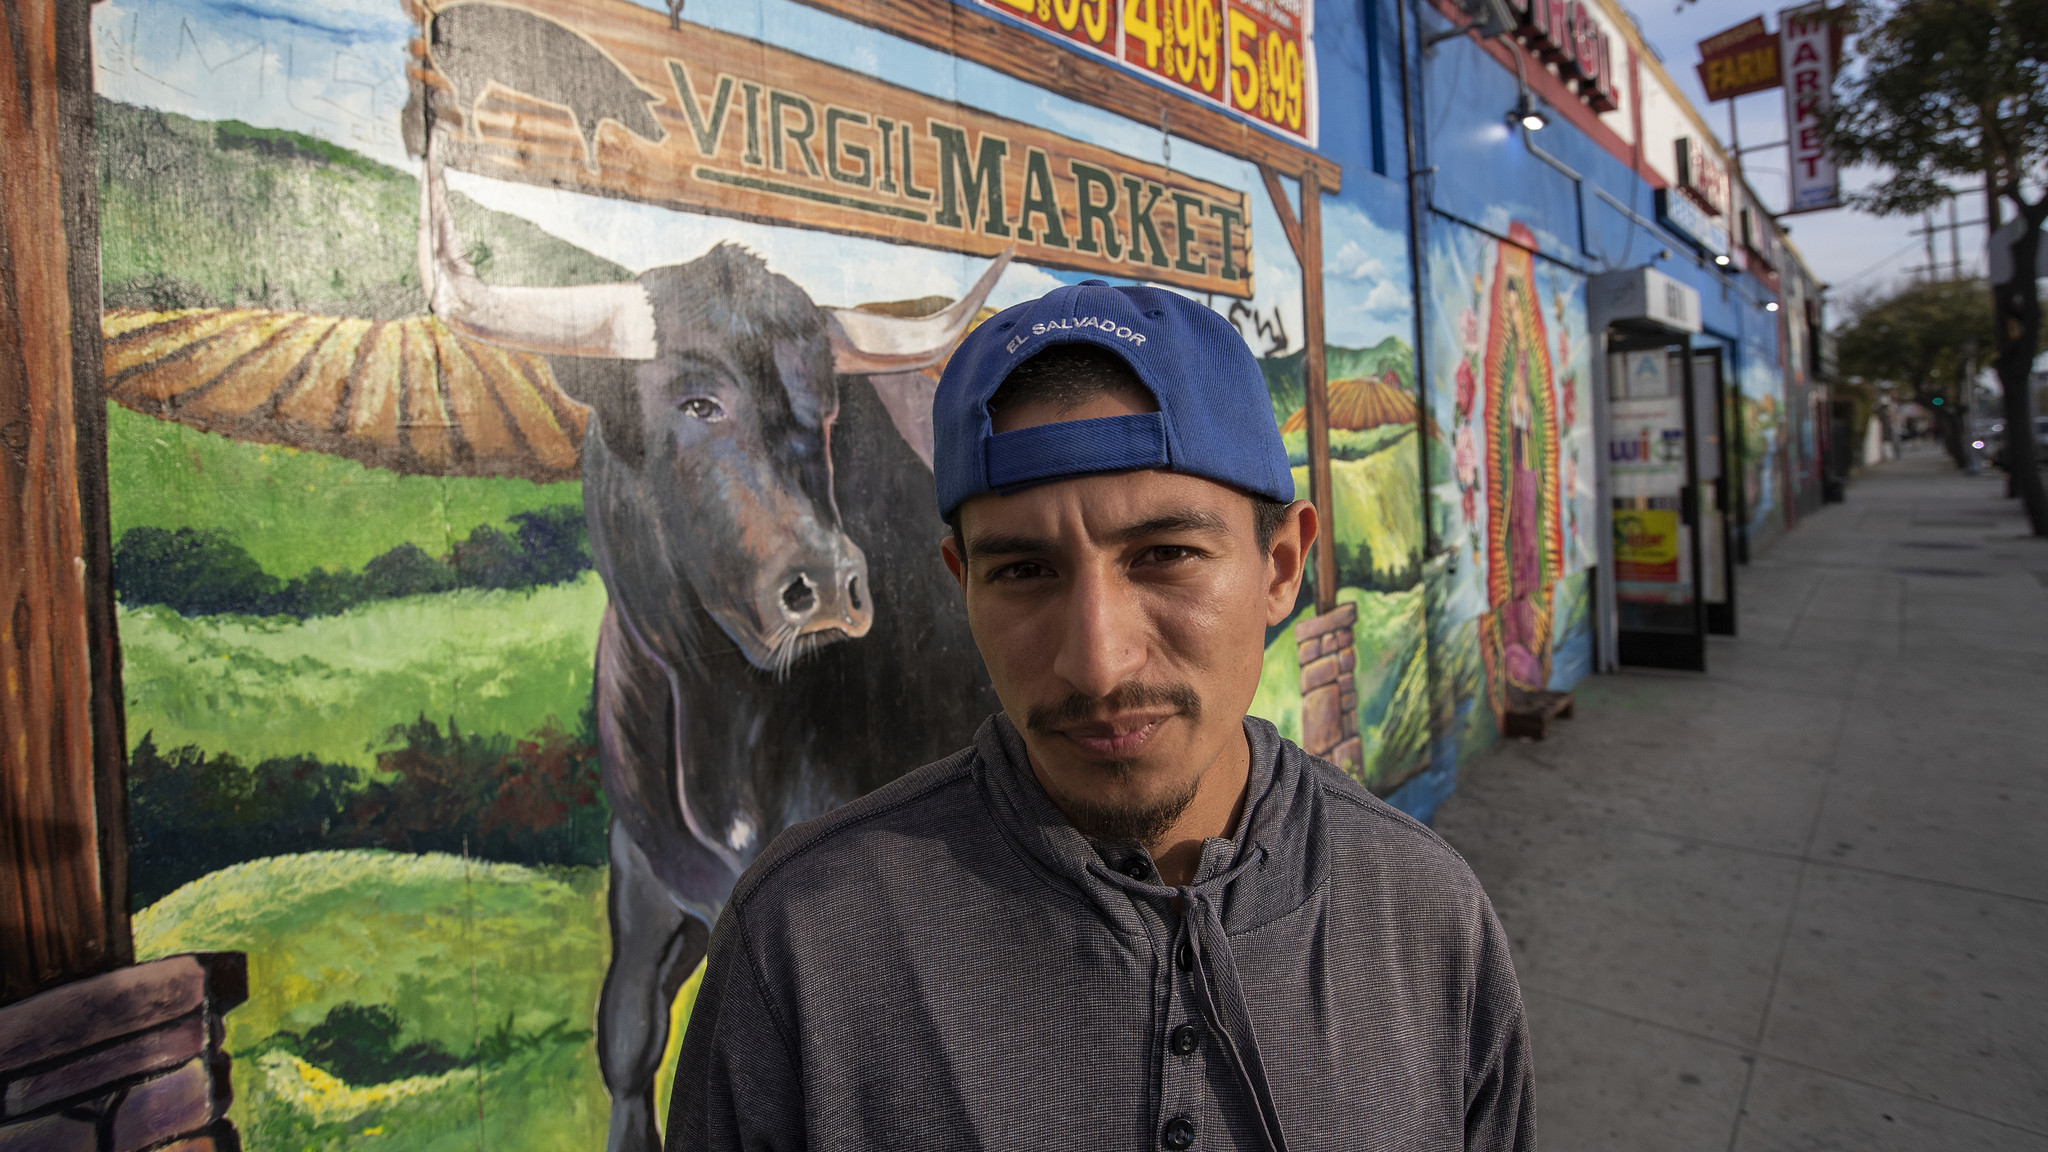 LOS ANGELES, CA-FEBRUARY 27, 2019: Jimmy Recinos, 28, is photographed outside of Virgil Farm Market,